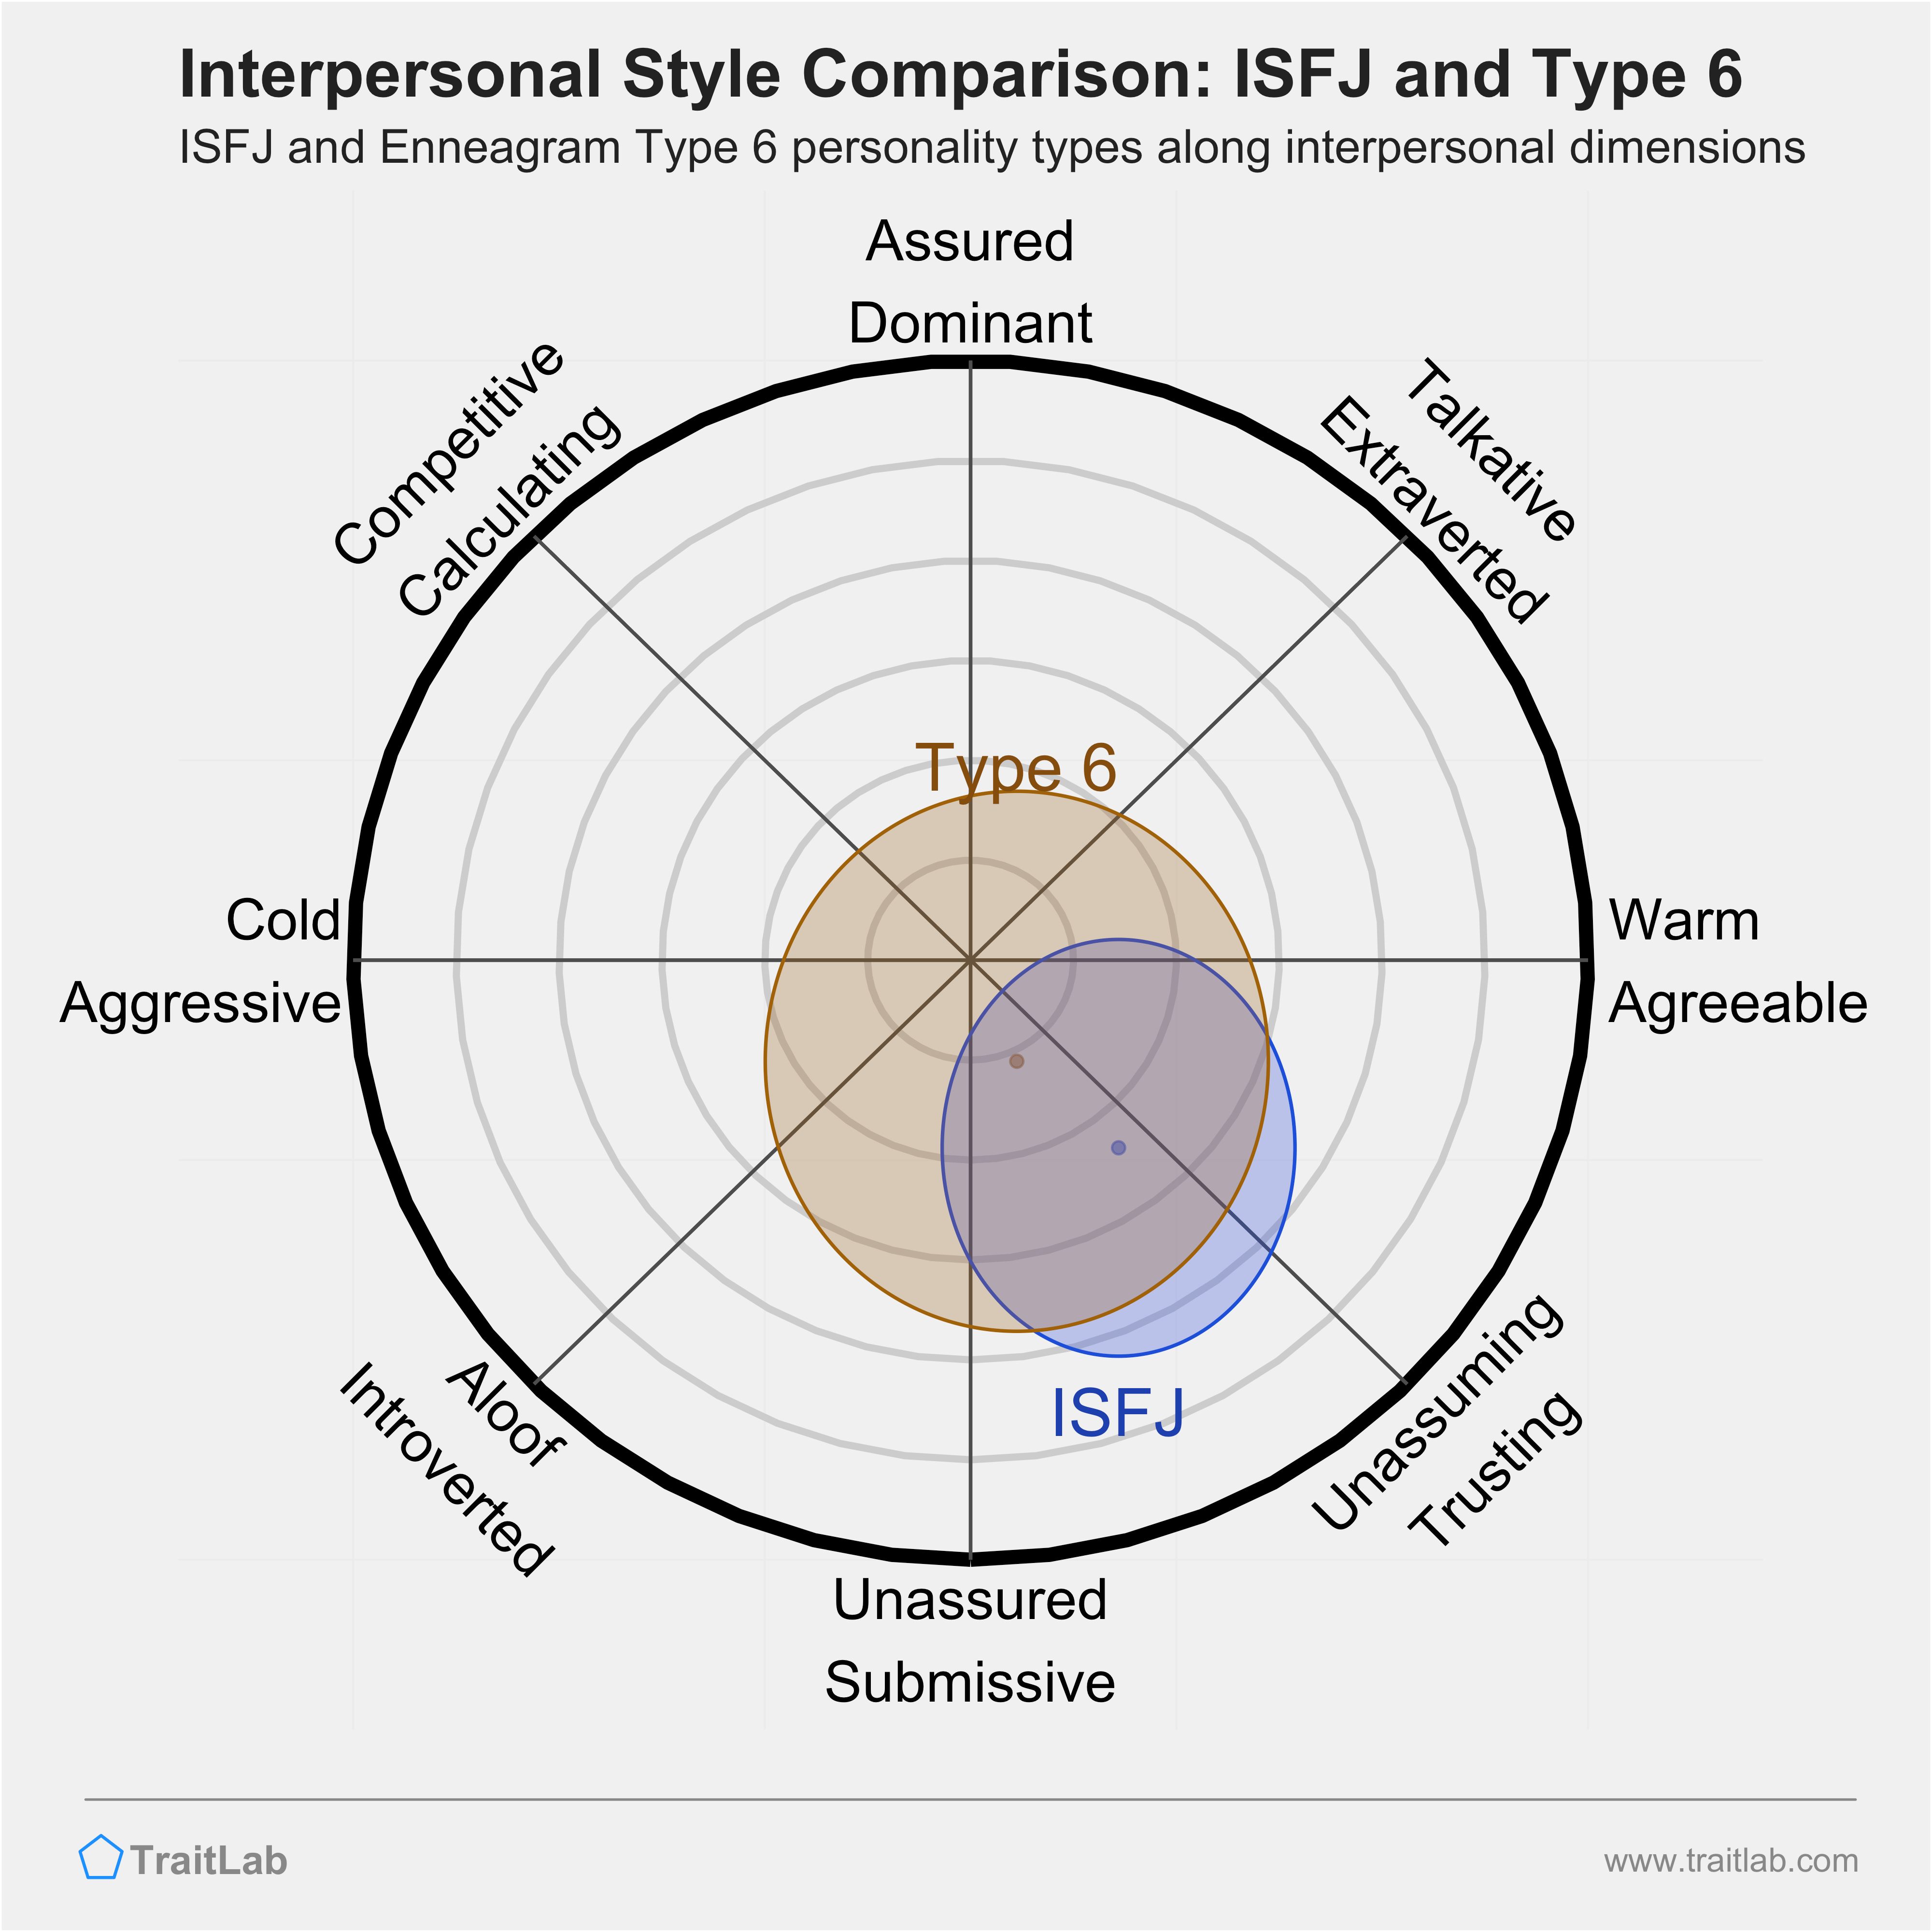 Enneagram ISFJ and Type 6 comparison across interpersonal dimensions